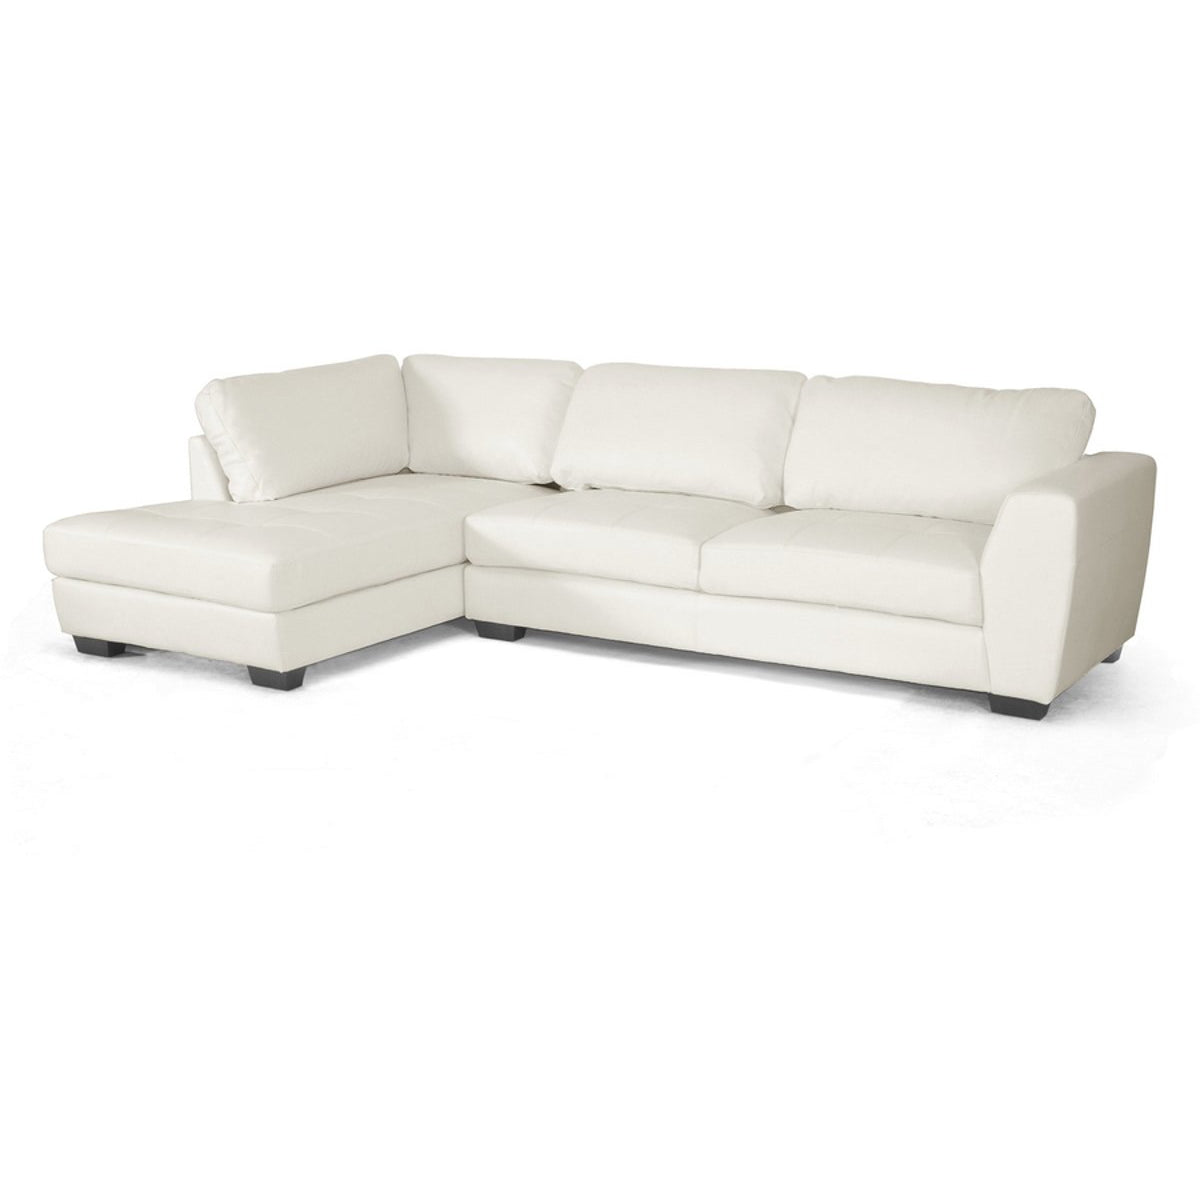 Baxton Studio Orland White Leather Modern Sectional Sofa Set with Left Facing Chaise Baxton Studio-sectionals-Minimal And Modern - 1